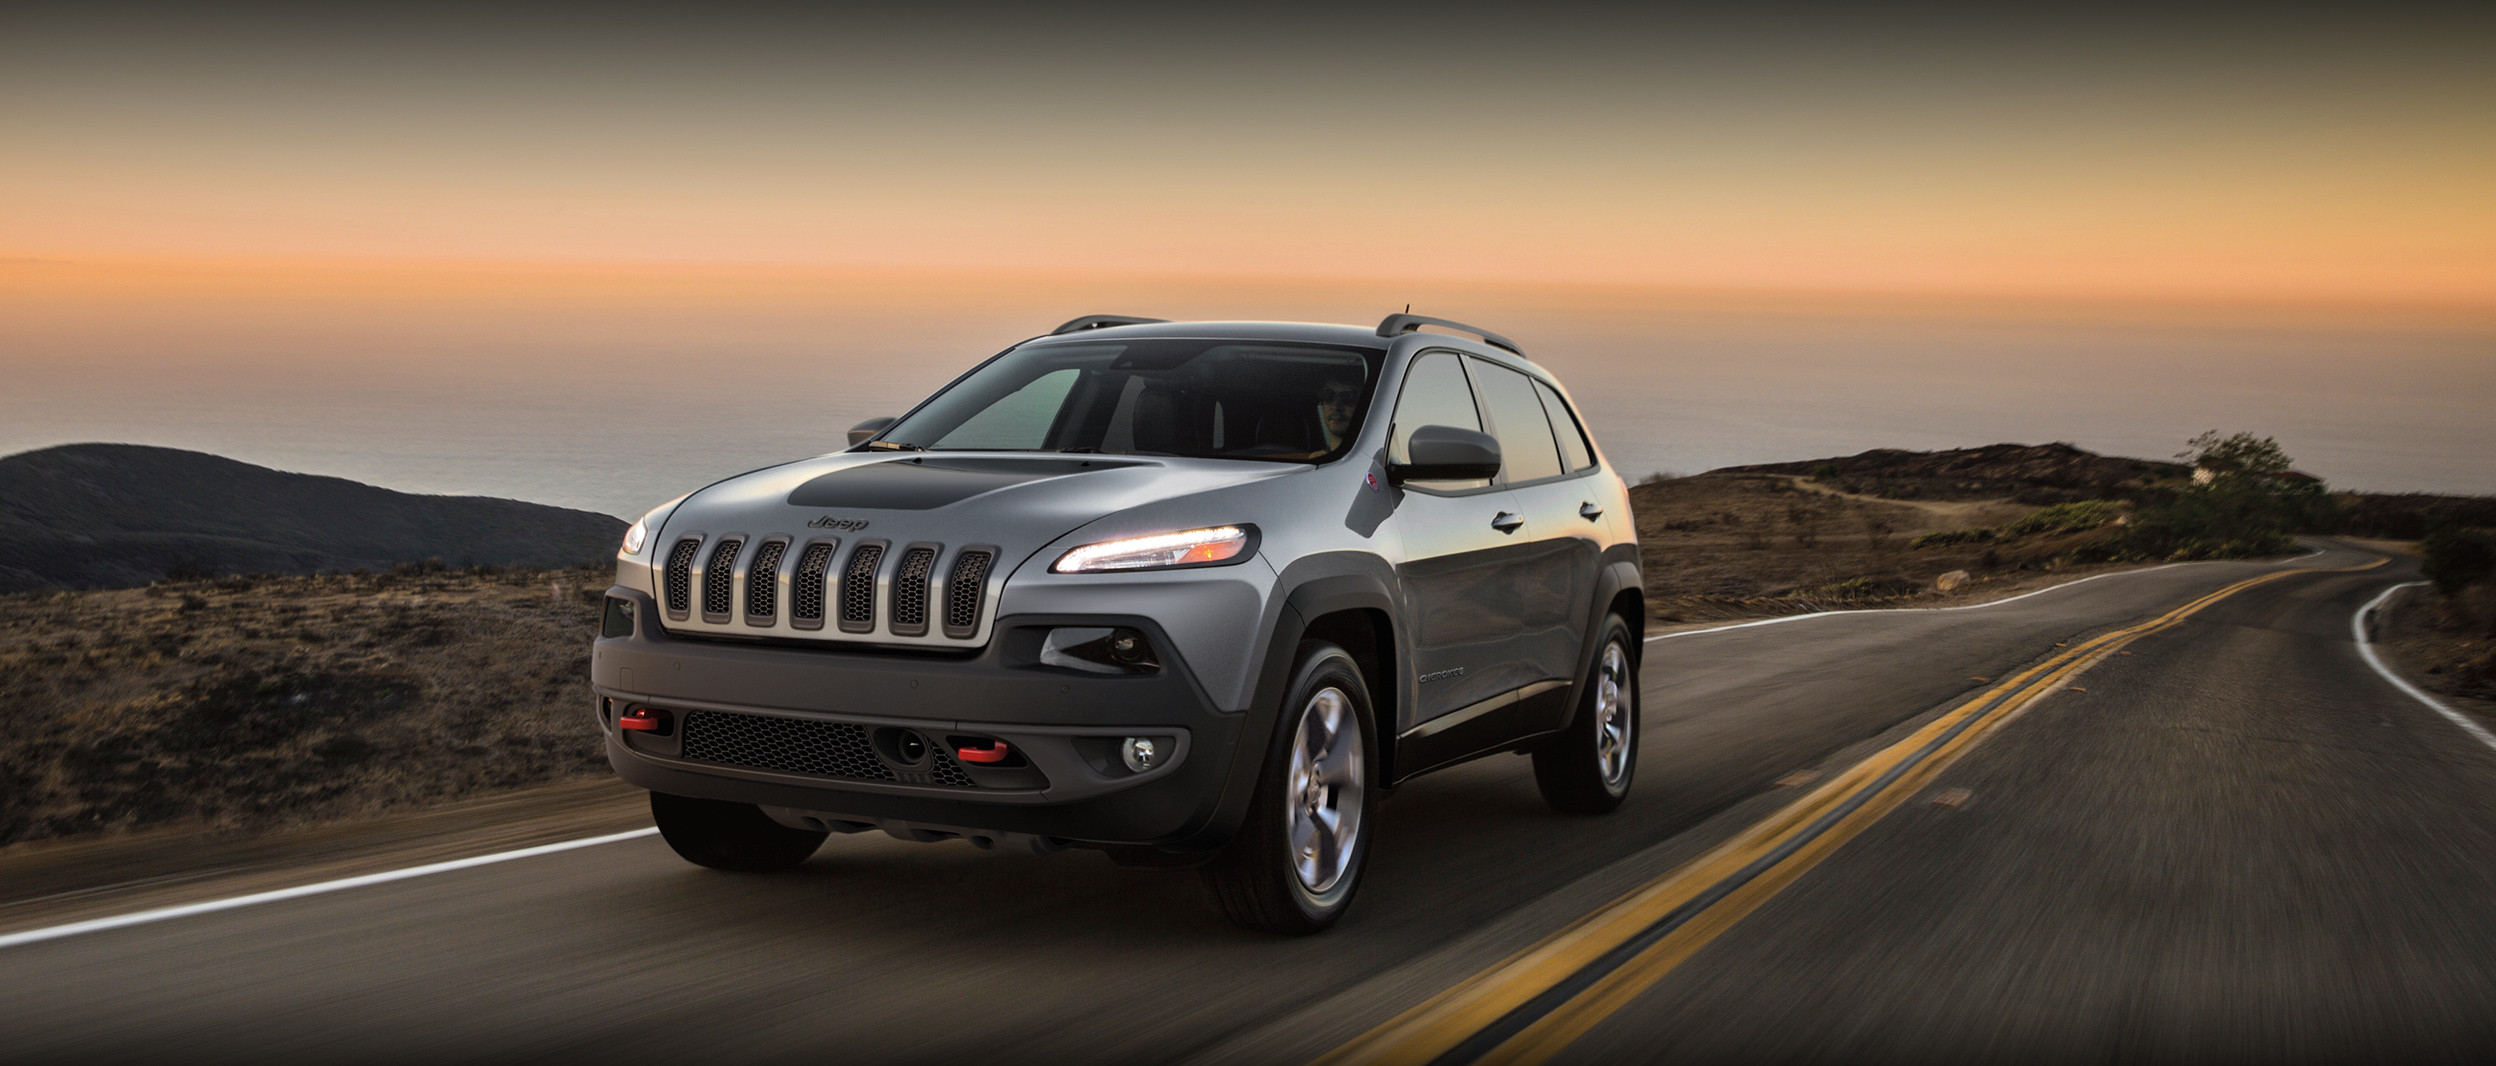 2014 jeep cherokee north owners manual